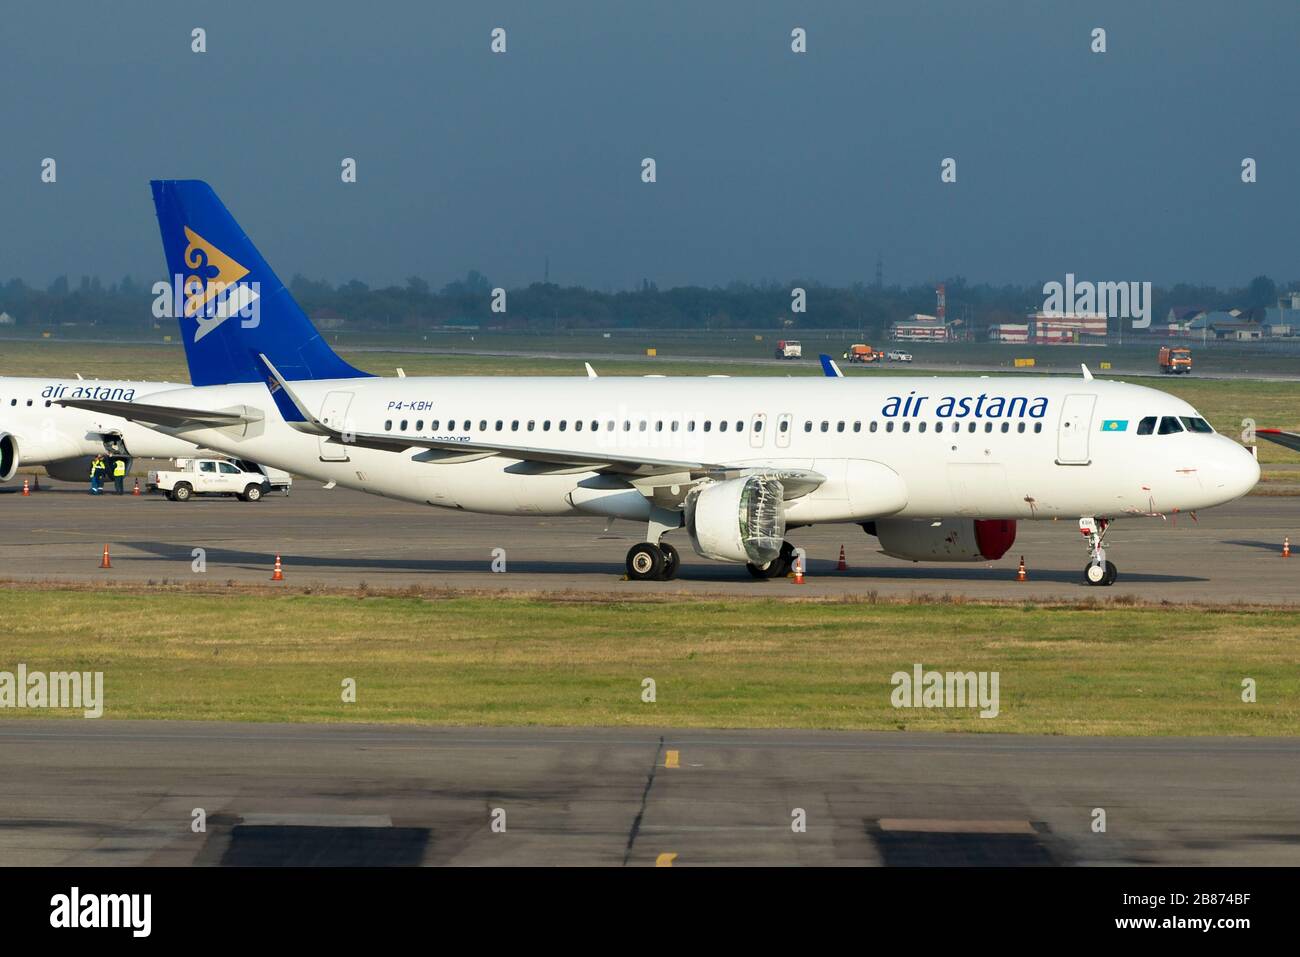 Air Astana Airbus A320 NEO without engine. First C check (heavy maintenance) for A320 family jets in Almaty, Kazakhstan. Aircraft registered as P4-KBH Stock Photo